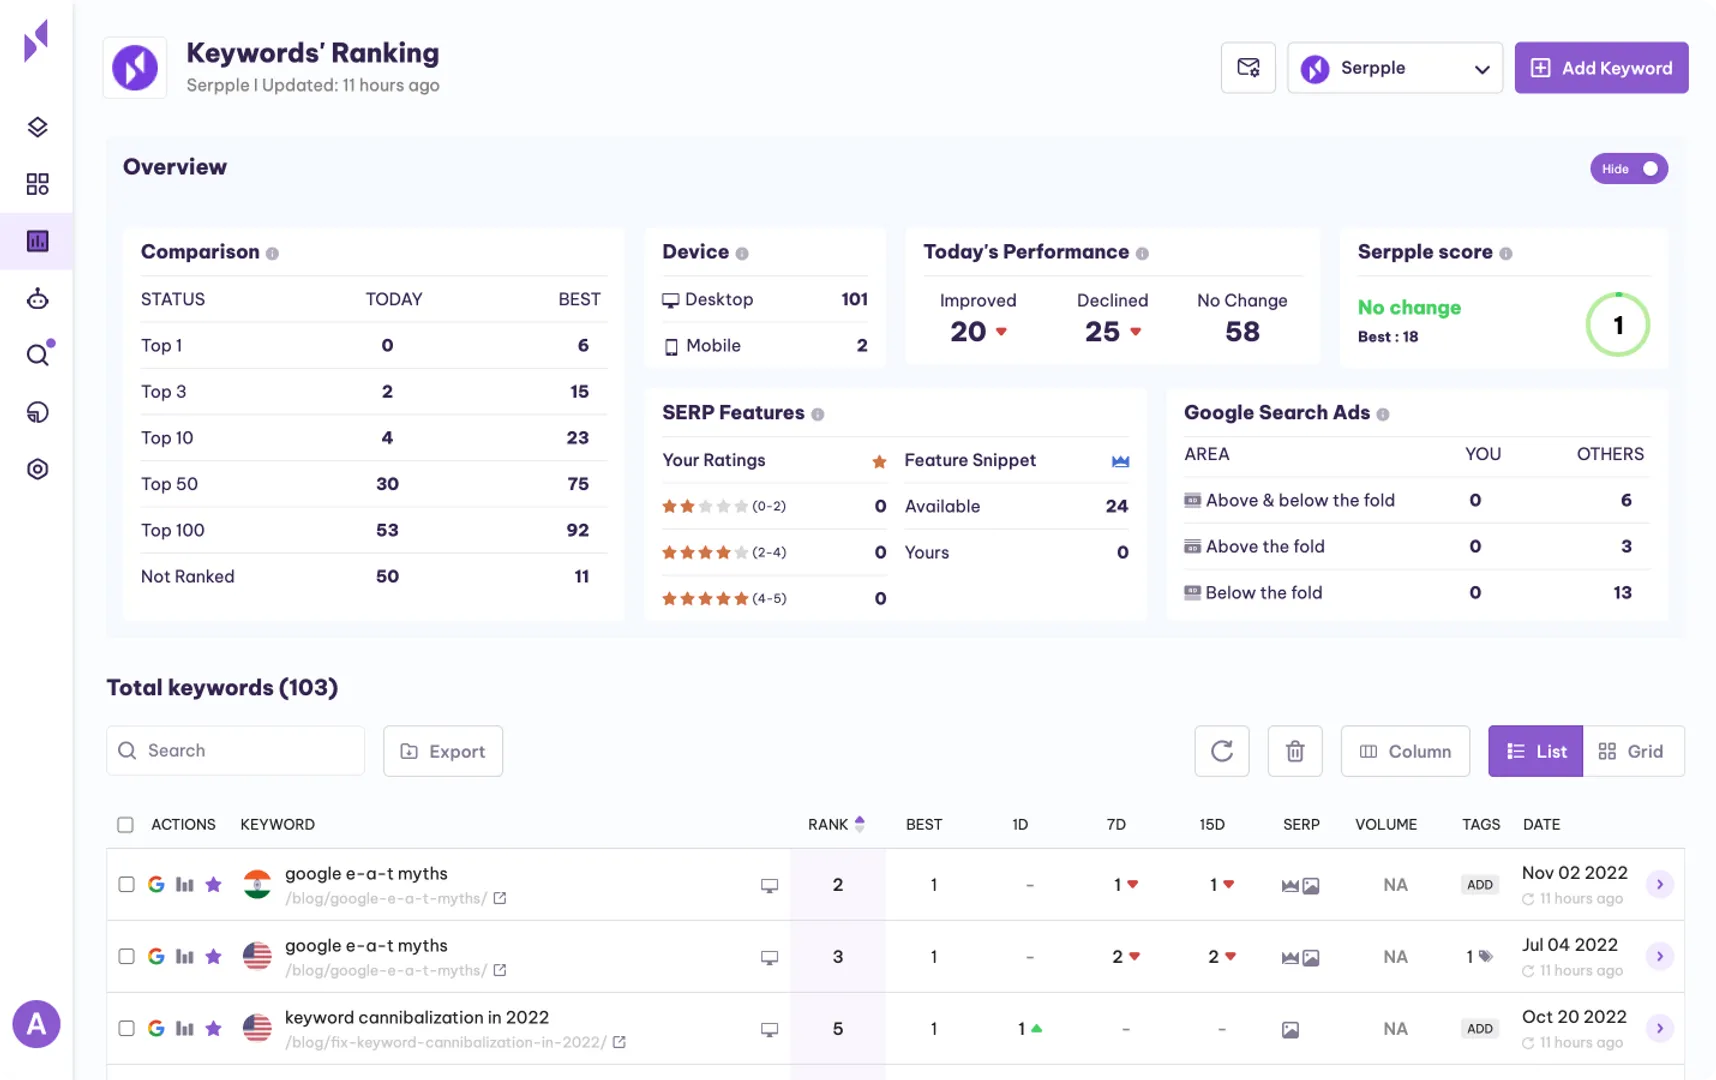 Mastering the Art of Daily Rank Tracking: Staying Ahead with Serpple - Your Ultimate SEO Keyword Rank Tracker

Have you ever struggled with an SEO keyword rank tracker that fails to deliver the insights you need?

Introducing Serpple - The Advanced SEO Keyword Rank Tracker

Serpple is not just any keyword rank tracker; it's an advanced and optimized tool designed to elevate your SEO journey. With its precise and reliable data, Serpple ensures you stay on top of search engine rankings effortlessly.

1. Unmatched Accuracy for Informed Decisions:
Serpple boasts unmatched accuracy, offering precise keyword rankings with a remarkable 99.5% precision rate. Say goodbye to guesswork and make data-driven decisions to optimize your website effectively.

2. Comprehensive Rank Tracking:
Gone are the days of focusing solely on keyword rankings. Serpple goes above and beyond by tracking SERP features and analyzing your competitors. Armed with this comprehensive data, you can outperform your rivals and secure a competitive advantage.

3. Data-Driven Strategy Planning:
Understanding your keyword's performance in SERPs is essential for devising a winning SEO strategy. With Serpple's real-time tracking, you can monitor keyword trends and fine-tune your approach to perfection.

4. Location-Specific Insights:
Targeting local audiences is crucial for businesses, and Serpple recognizes this. By providing location-specific results, Serpple ensures you optimize your website for the right audience, boosting your online presence significantly.

5. Customizable Alerts for Timely Updates:
Stay ahead of the game with Serpple's customizable daily alerts and notifications. Get instant updates on rank changes, allowing you to respond promptly to any fluctuations.

6. Maintain Your Ranking History with Ease:
Serpple not only offers real-time data but also keeps track of your ranking history. By maintaining a historical record, you can visualize your progress and adapt your strategies for long-term success.

7. Hassle-Free Keyword Insights:
With Serpple, accessing crucial keyword metrics like ranking position and search volume is a breeze. No more wasting time on complex interfaces - Serpple simplifies the process for you.

8. Enhanced ROI and Cost-Efficiency:
Optimize your SEO efforts with Serpple's powerful insights, resulting in improved ROI. By focusing on high-impact keywords, you can maximize your resources and achieve more significant results.

In conclusion, Serpple is the ultimate SEO keyword rank tracker that empowers you to master the art of daily rank tracking. With unmatched accuracy, comprehensive insights, and customizable features, Serpple propels your website ahead in search engine rankings.

Unlock the full potential of your SEO strategy with Serpple - Your optimized SEO keyword rank tracker. Embrace Serpple today, and witness the transformative impact on your website's performance.

Serpple Keyword Rank Tracker - https://www.serpple.com/